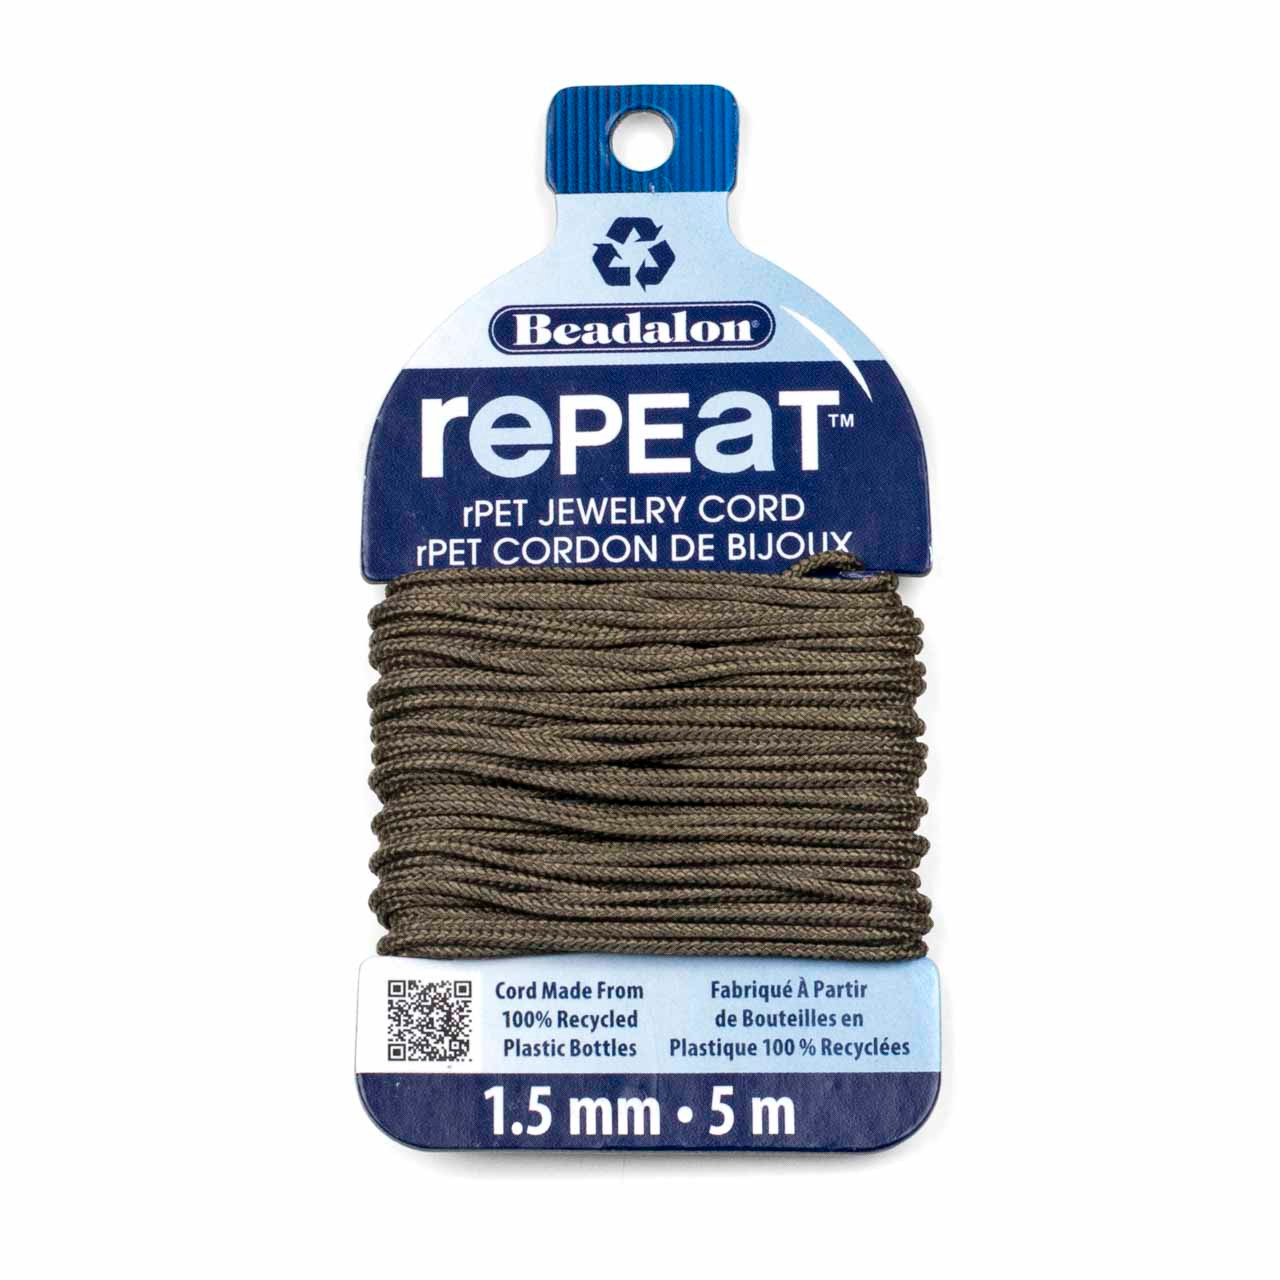 RePEaT 100% Recycled PET Braided Jewelry Cord - 1.5 mm, Earth